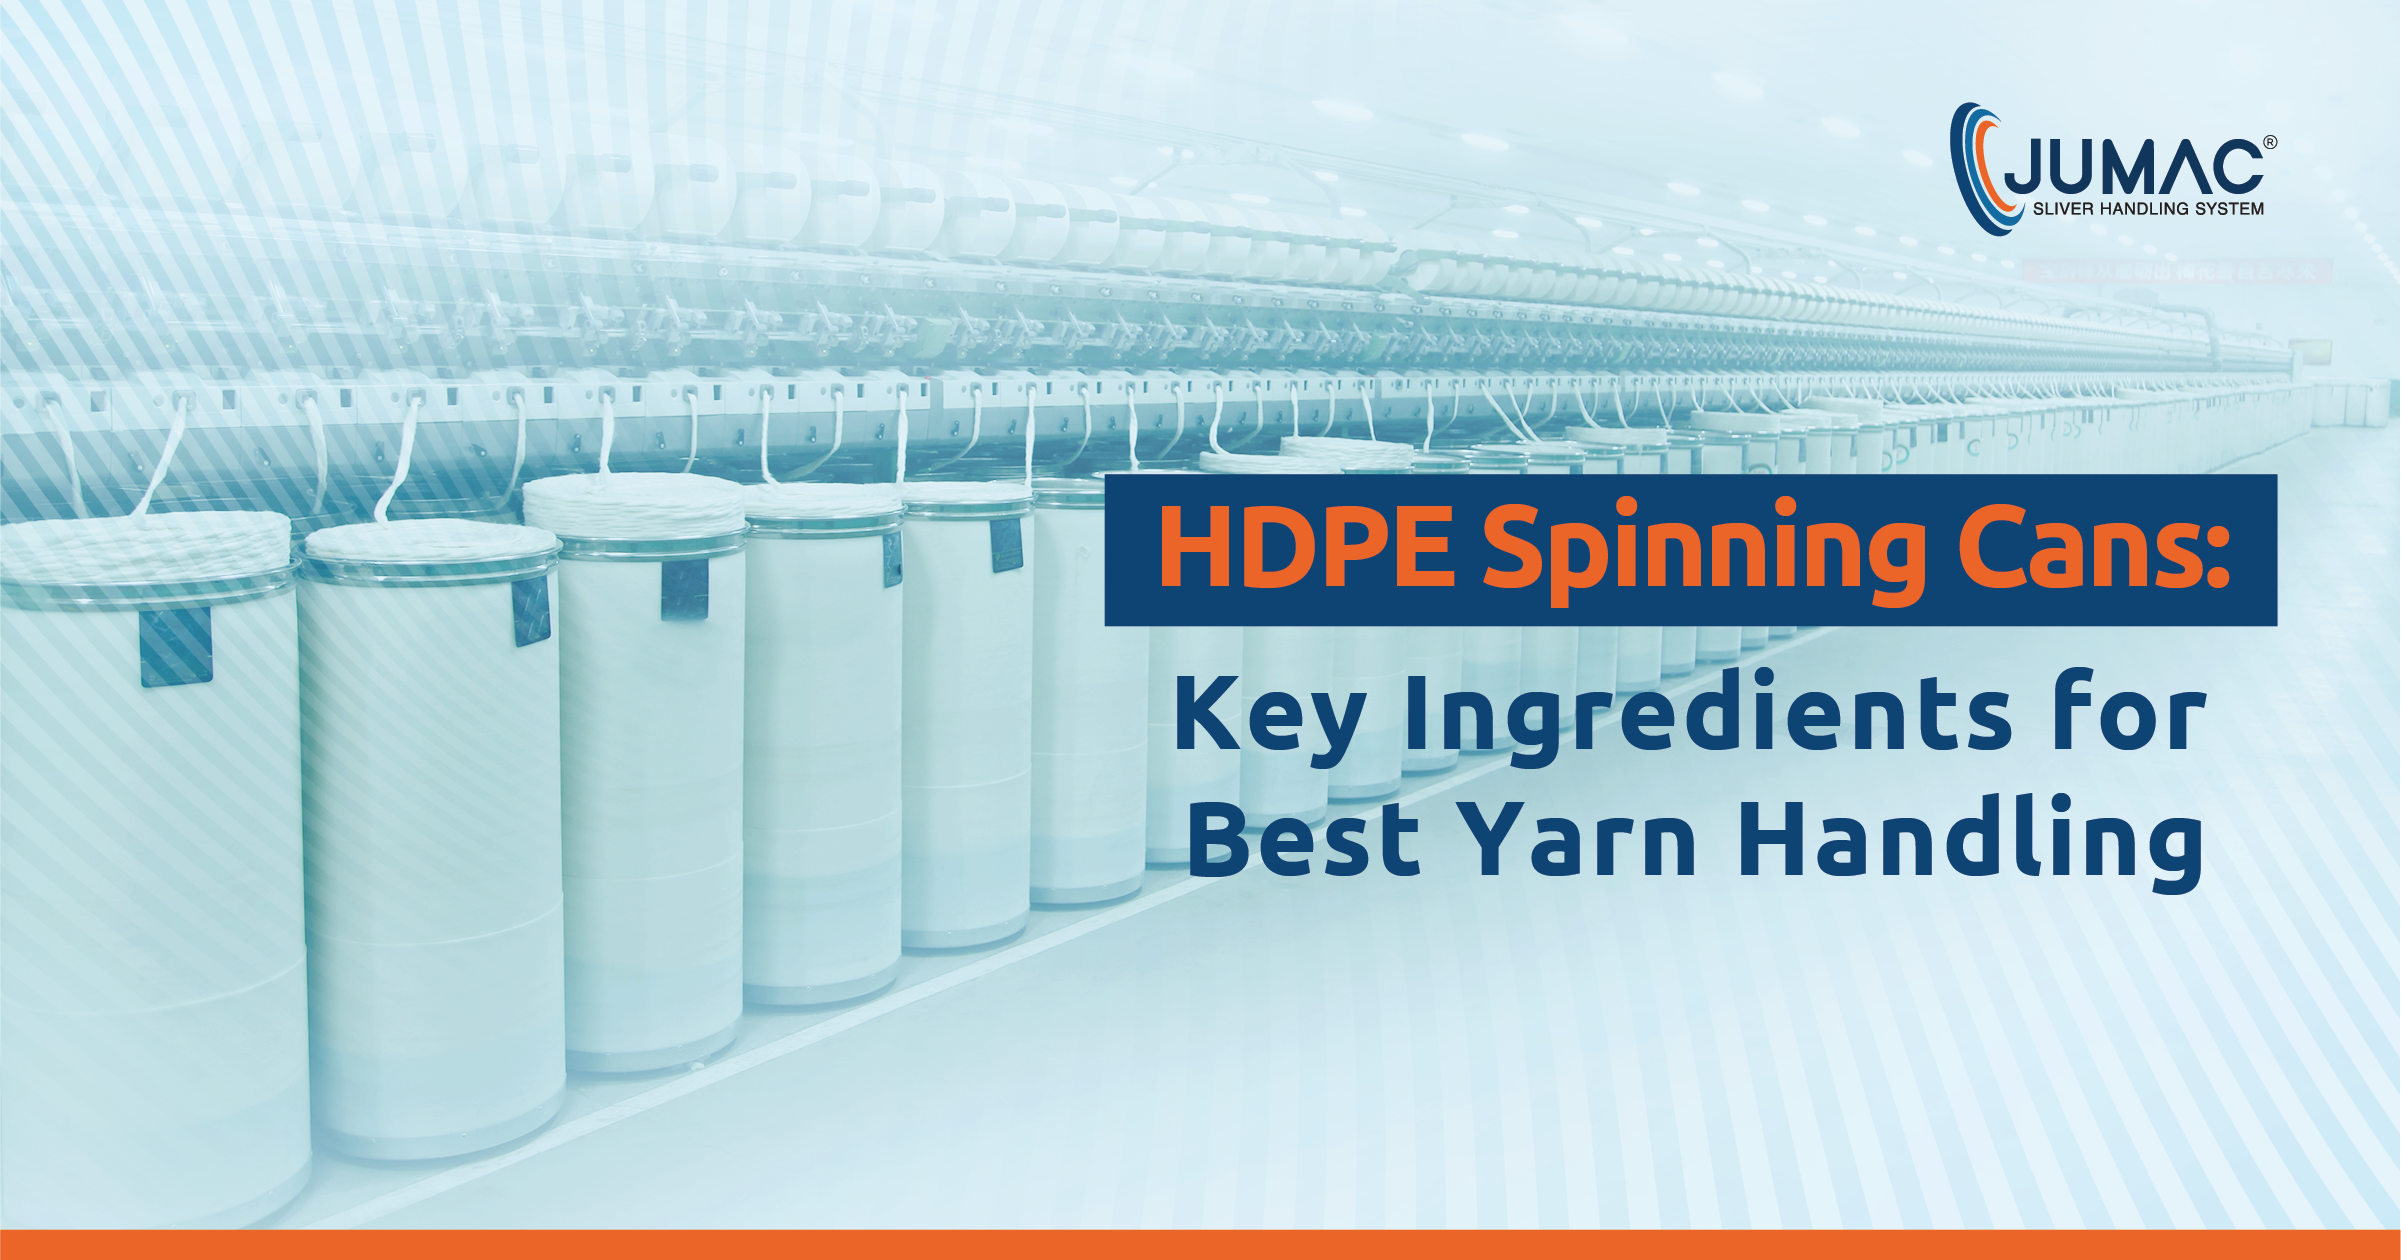 HDPE Spinning Cans: Key Ingredients for Best Yarn Handling